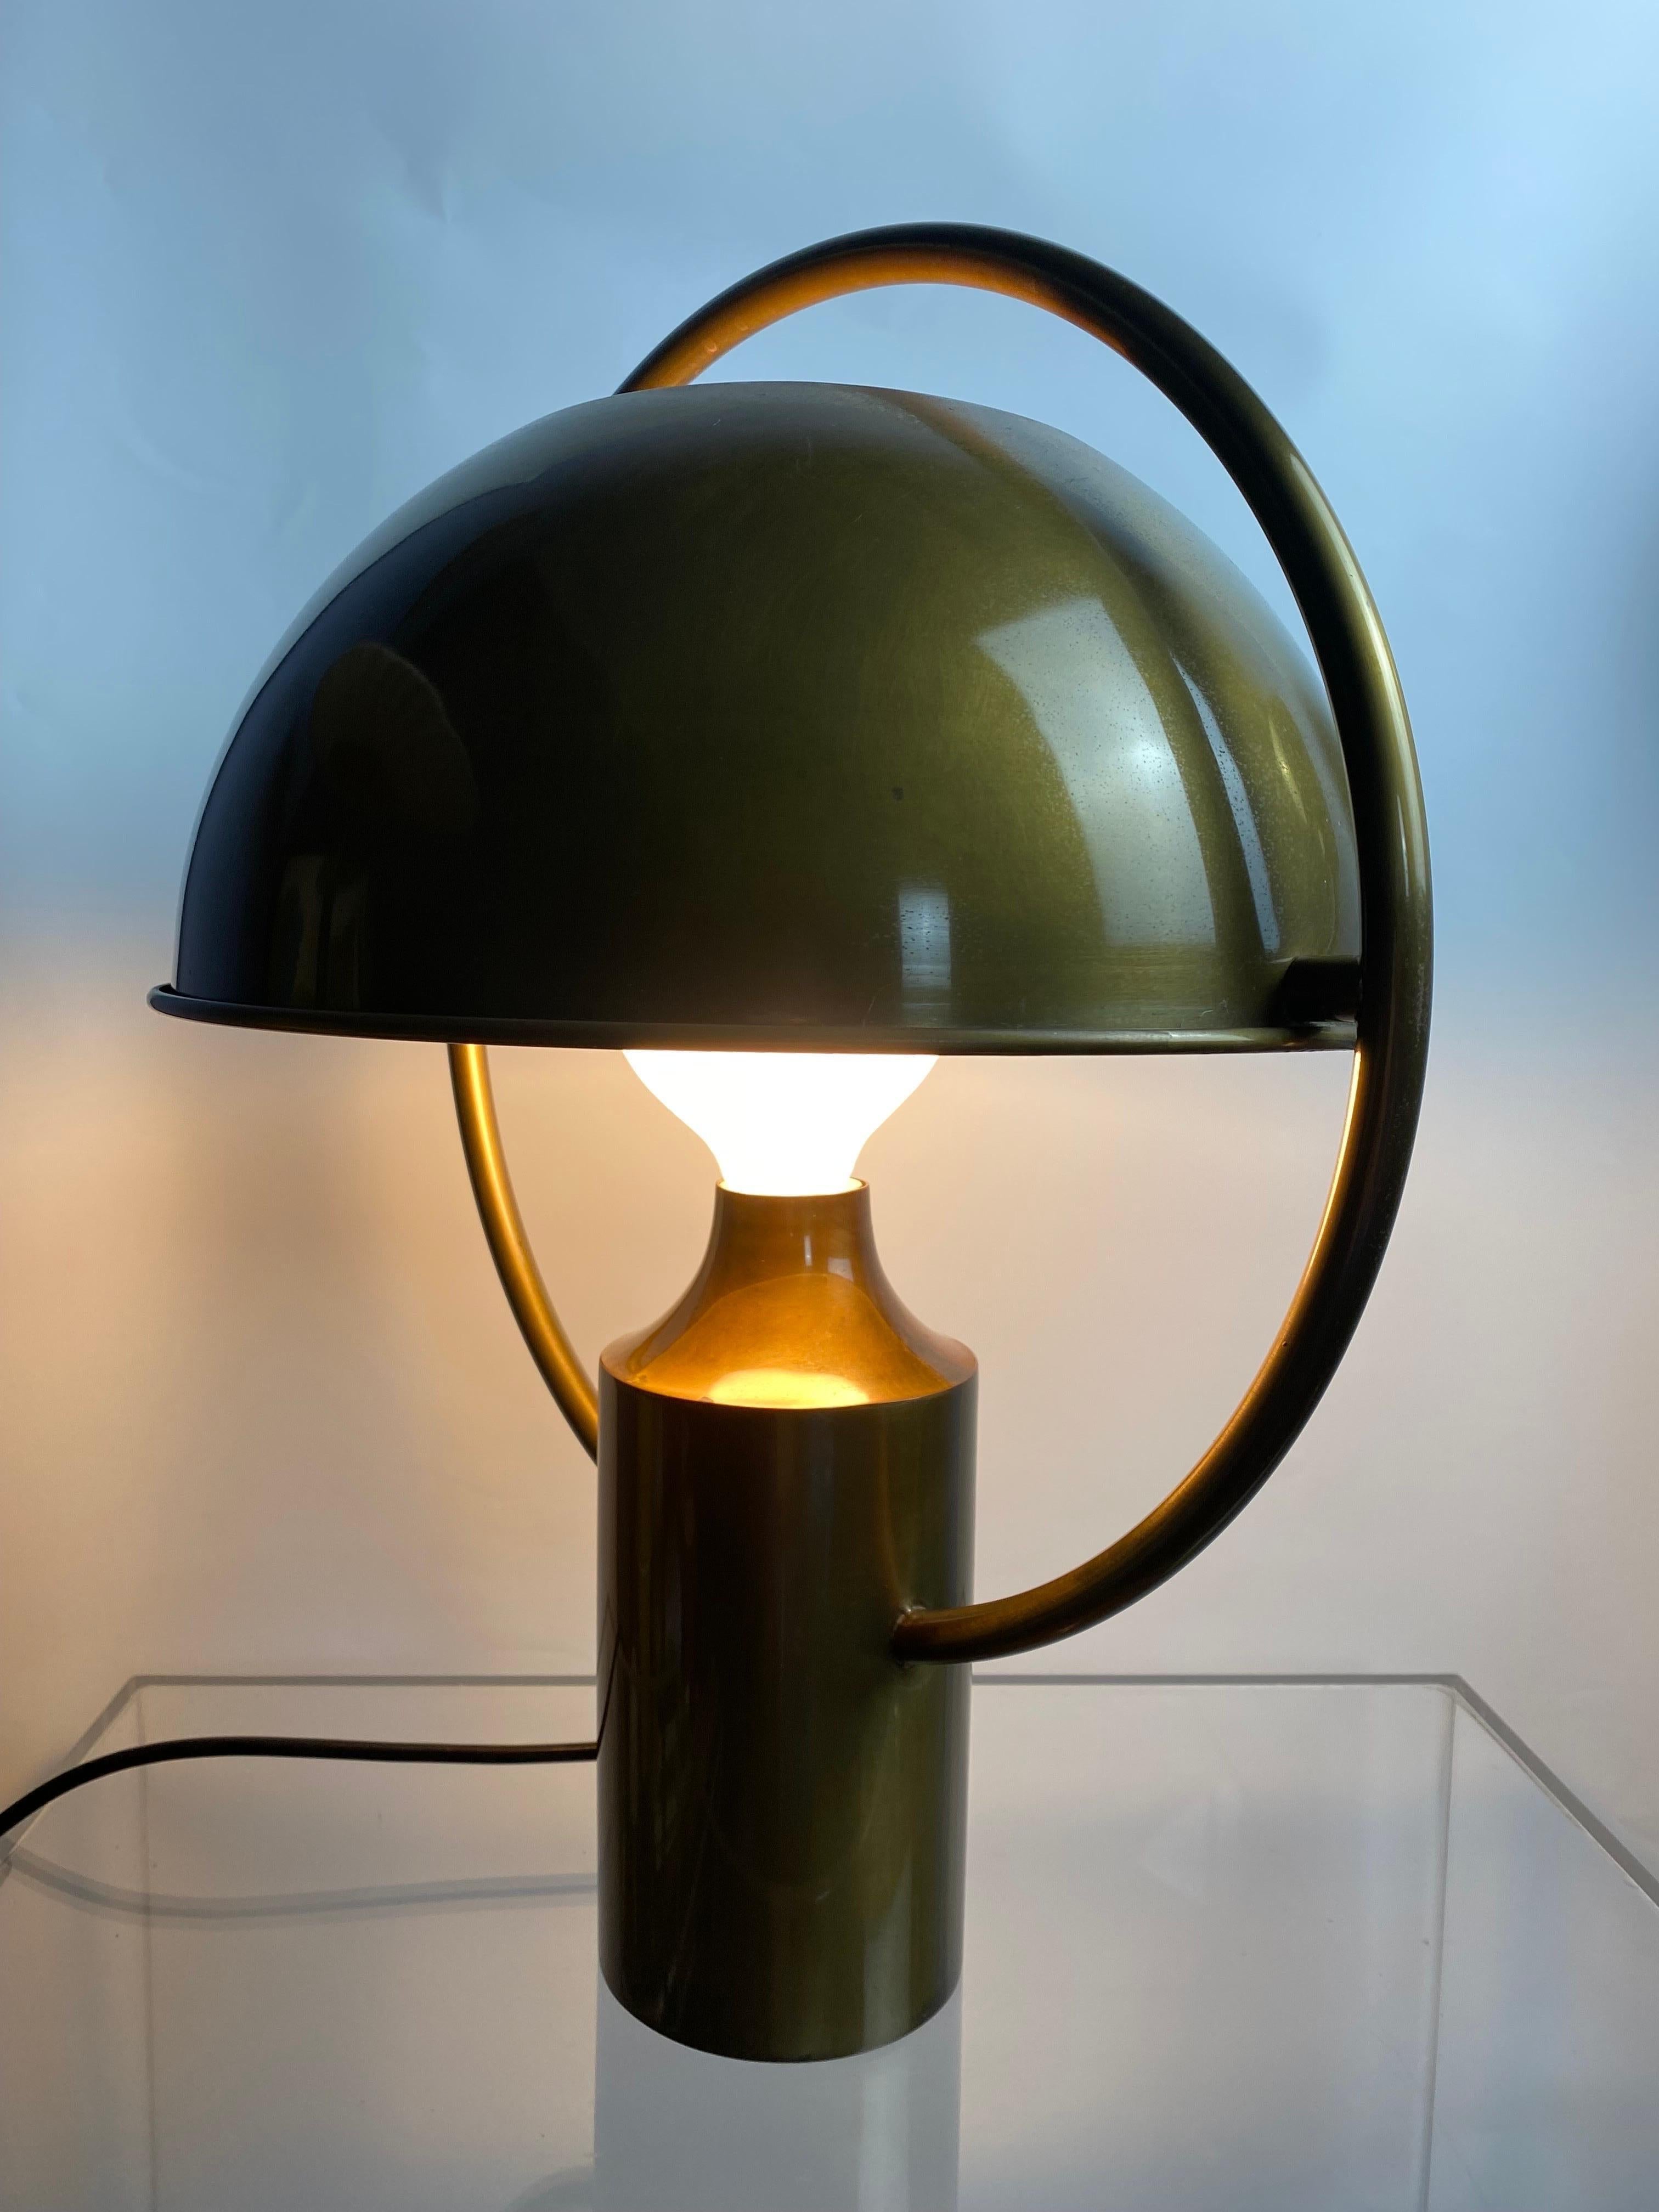 Rare German Midcentury Table Lamp in Solid Brass by Günter&Florian Schulz 1970s For Sale 9